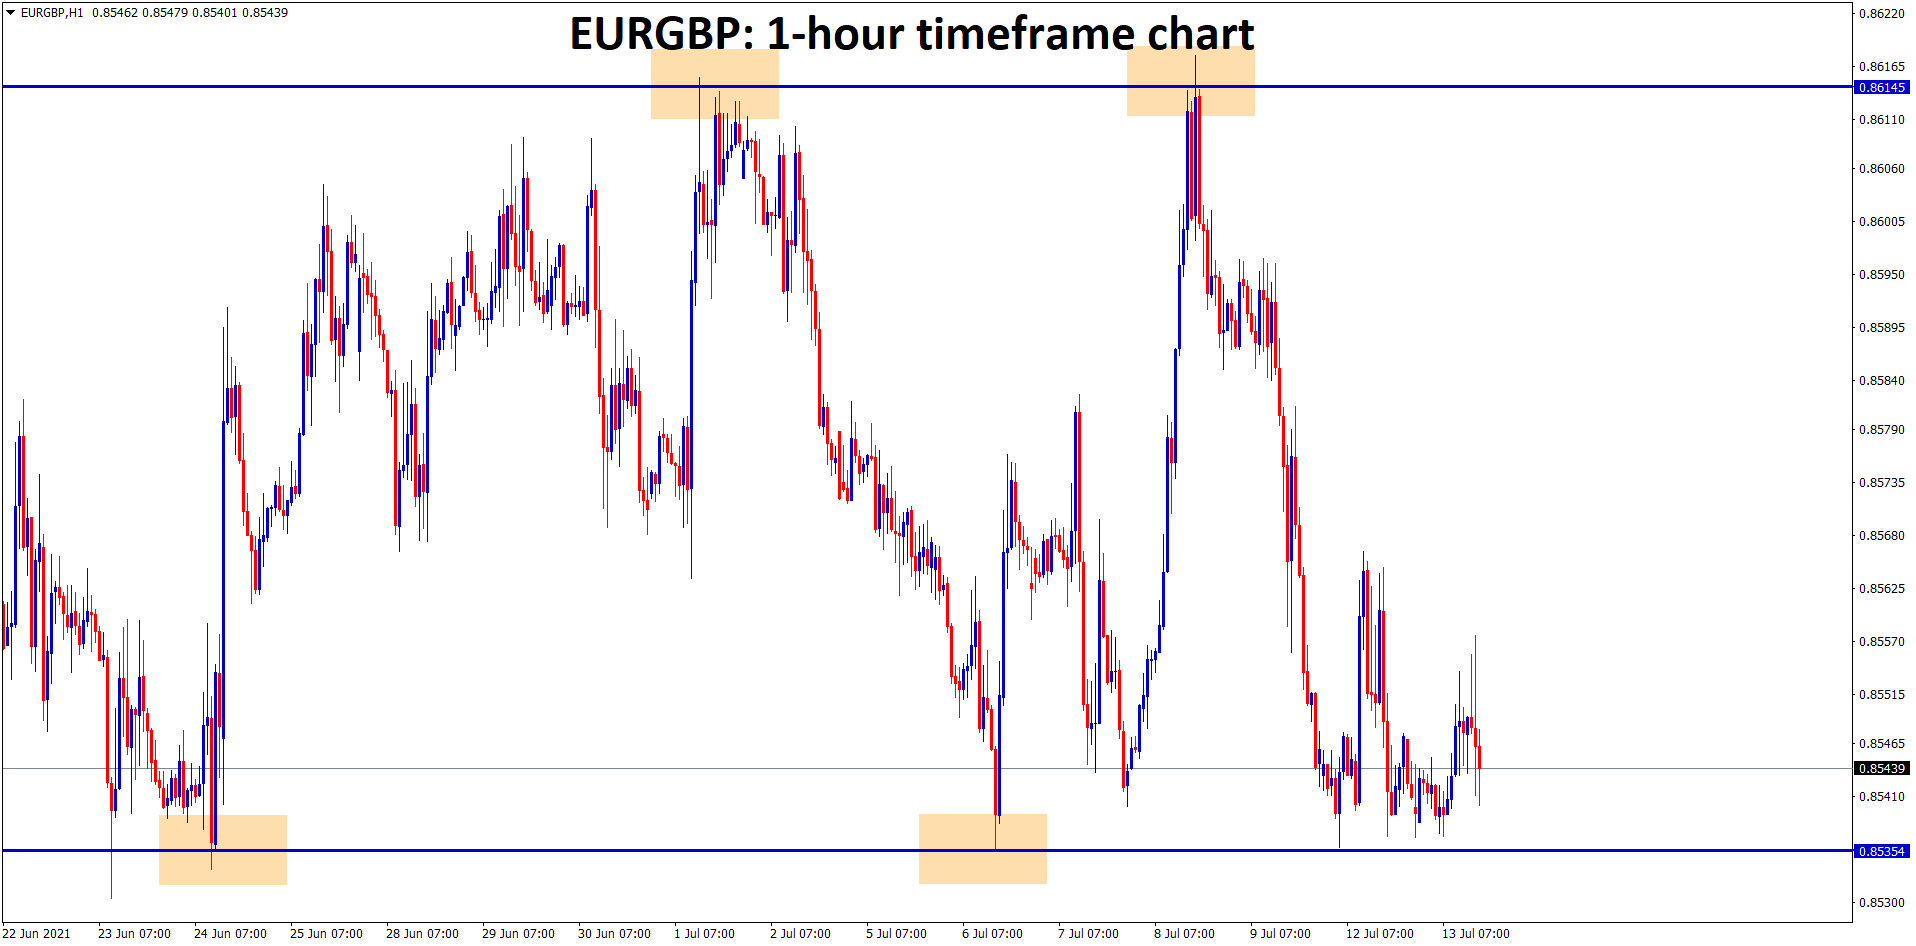 EURGBP is moving up and down between the resistance and support area.